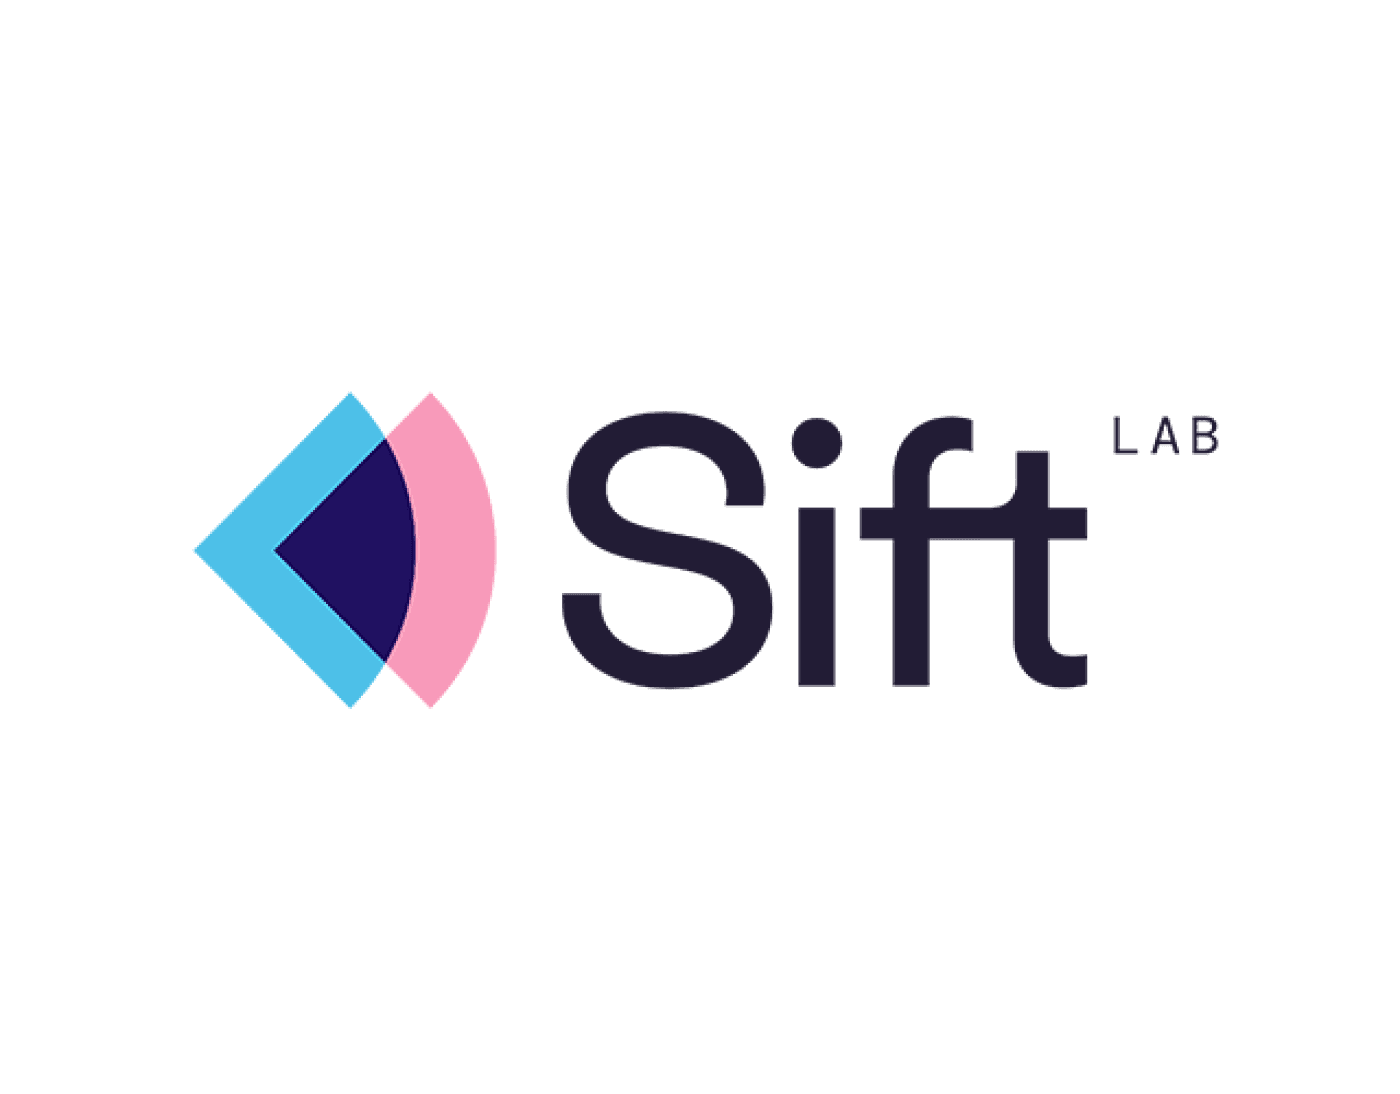 sift_lab-640x500-01.png